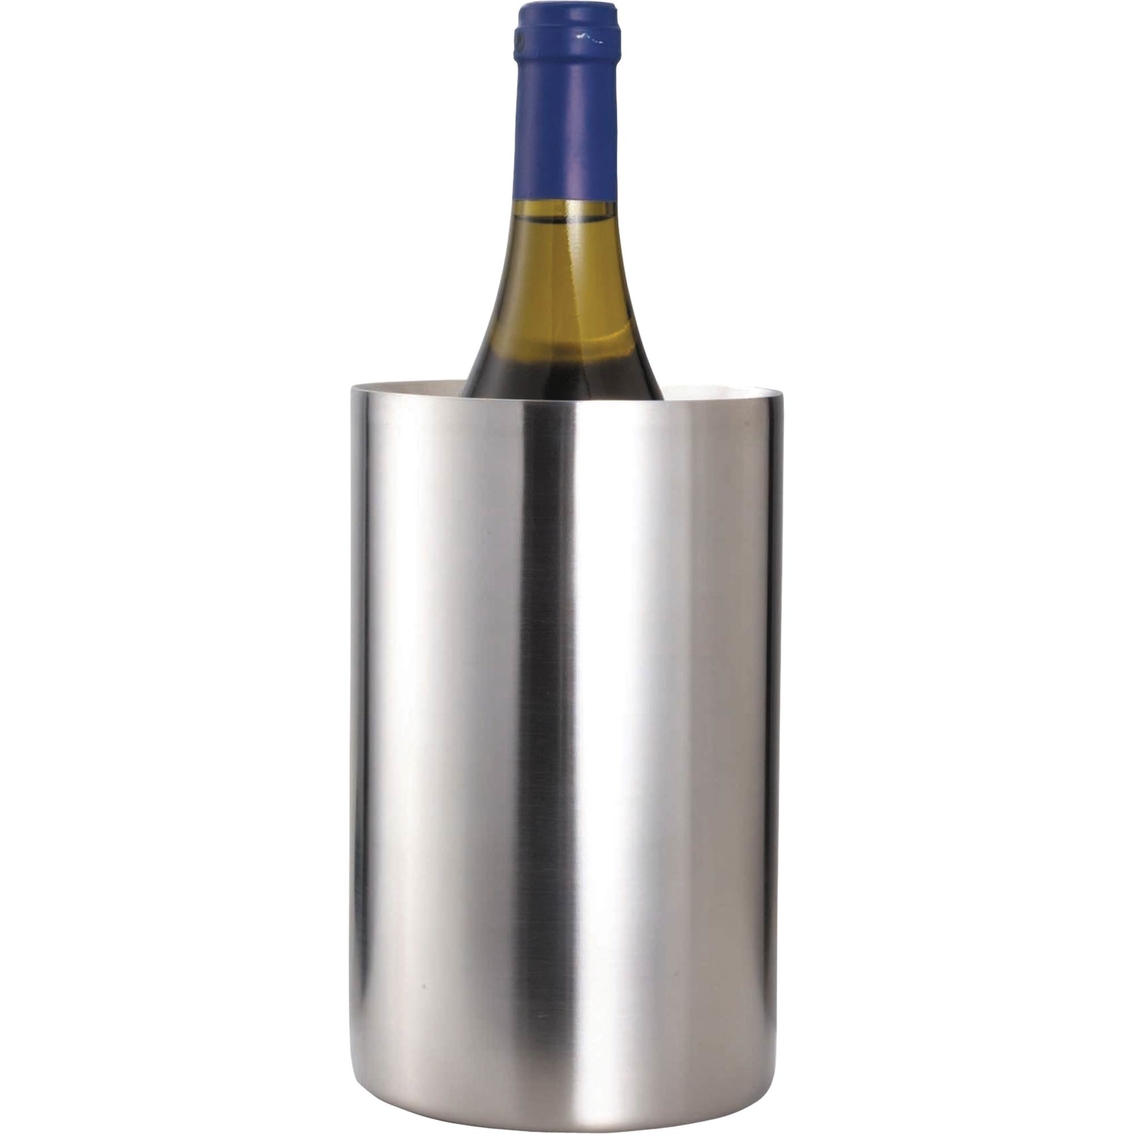 BarCraft Stainless Steel Double Walled Wine Cooler - Image 2 of 2